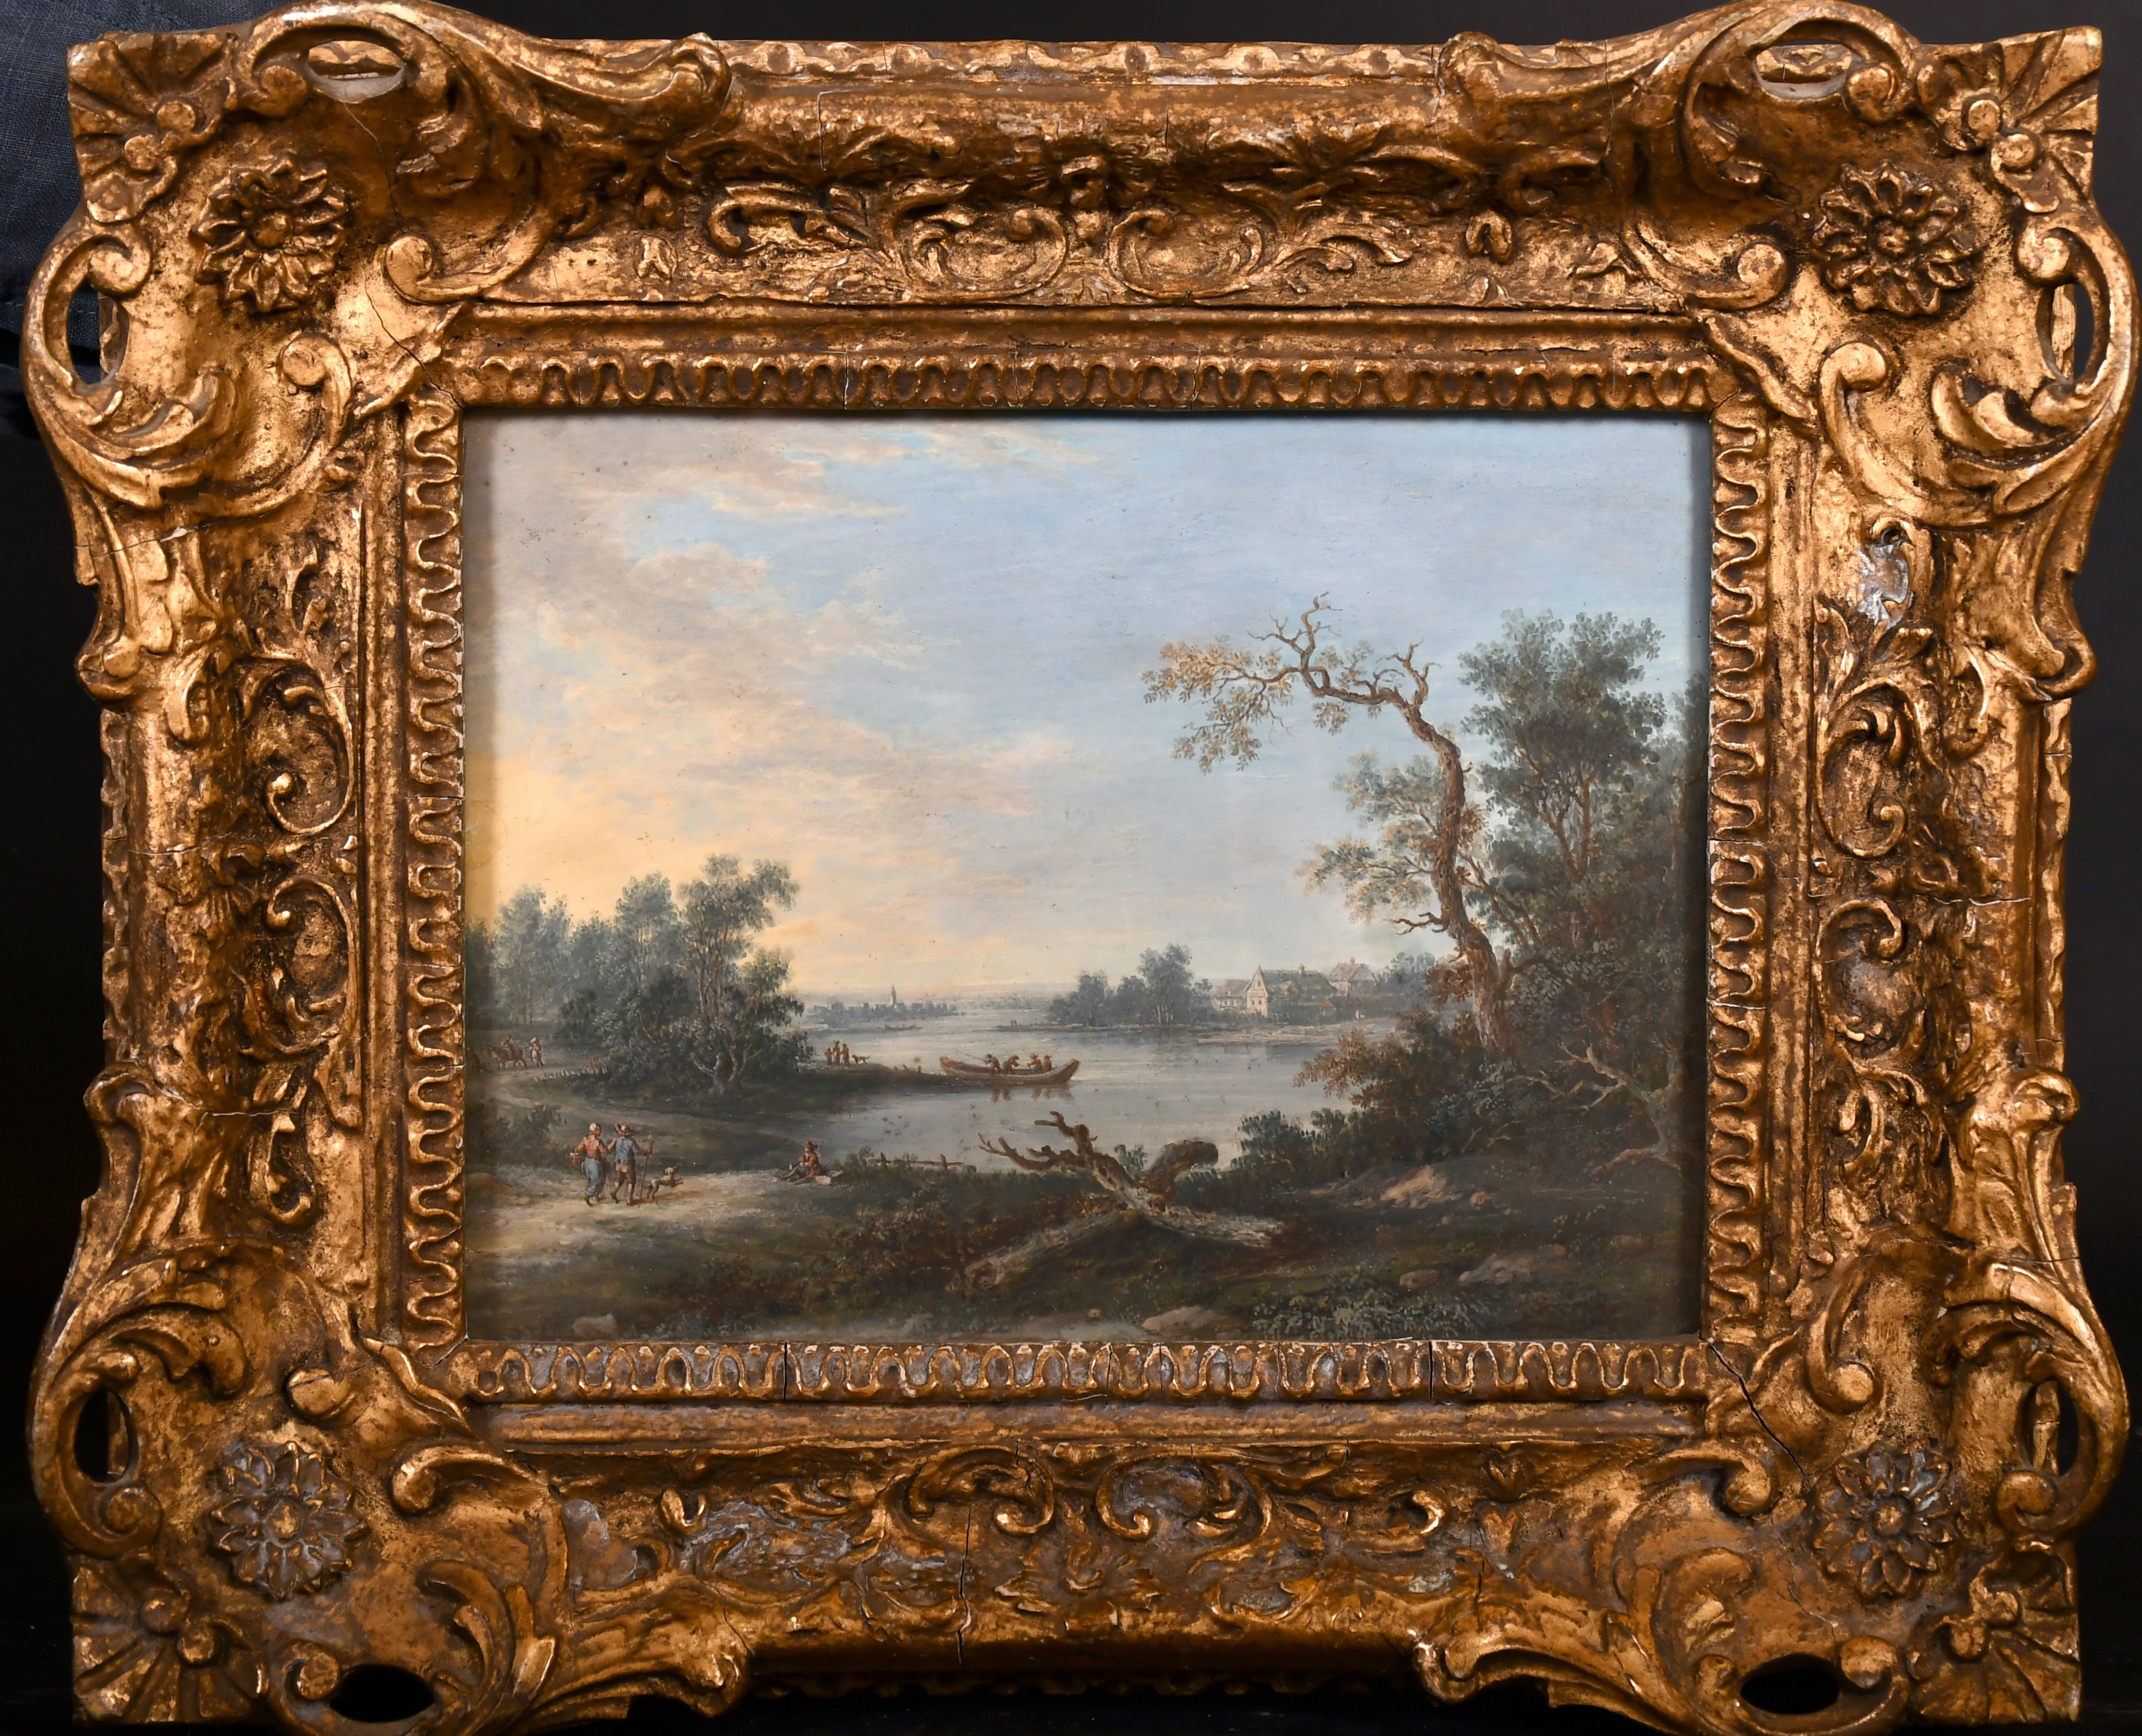 Attributed to Willem van Bemmel (1630-1708) Dutch. A Classical River Landscape with Figures, - Image 3 of 5